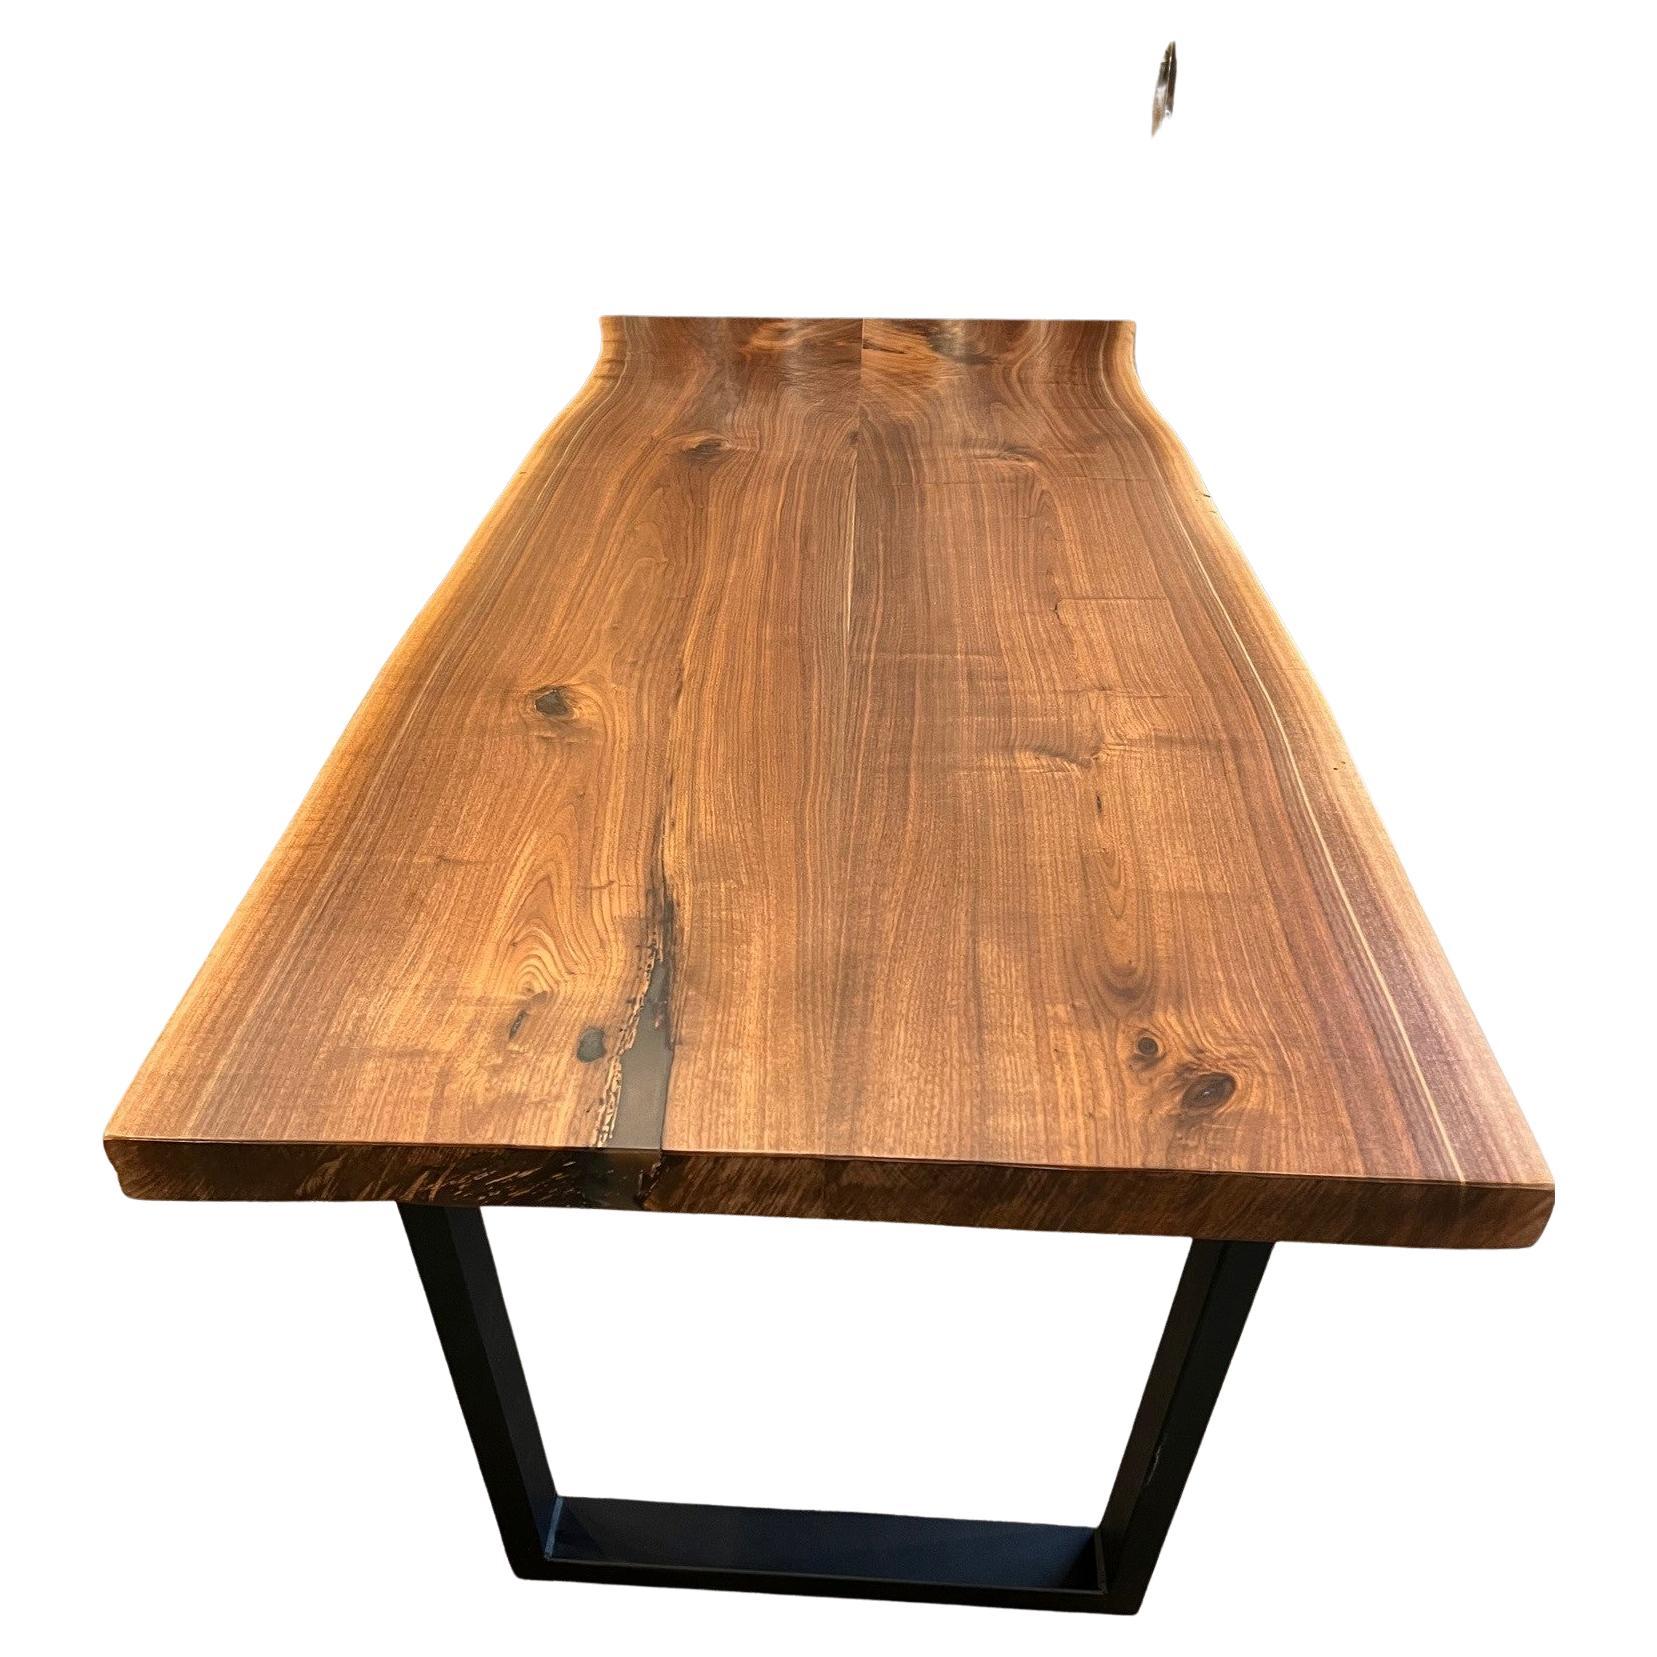  Walnut Live Edge Dining Table with Black Metal Base